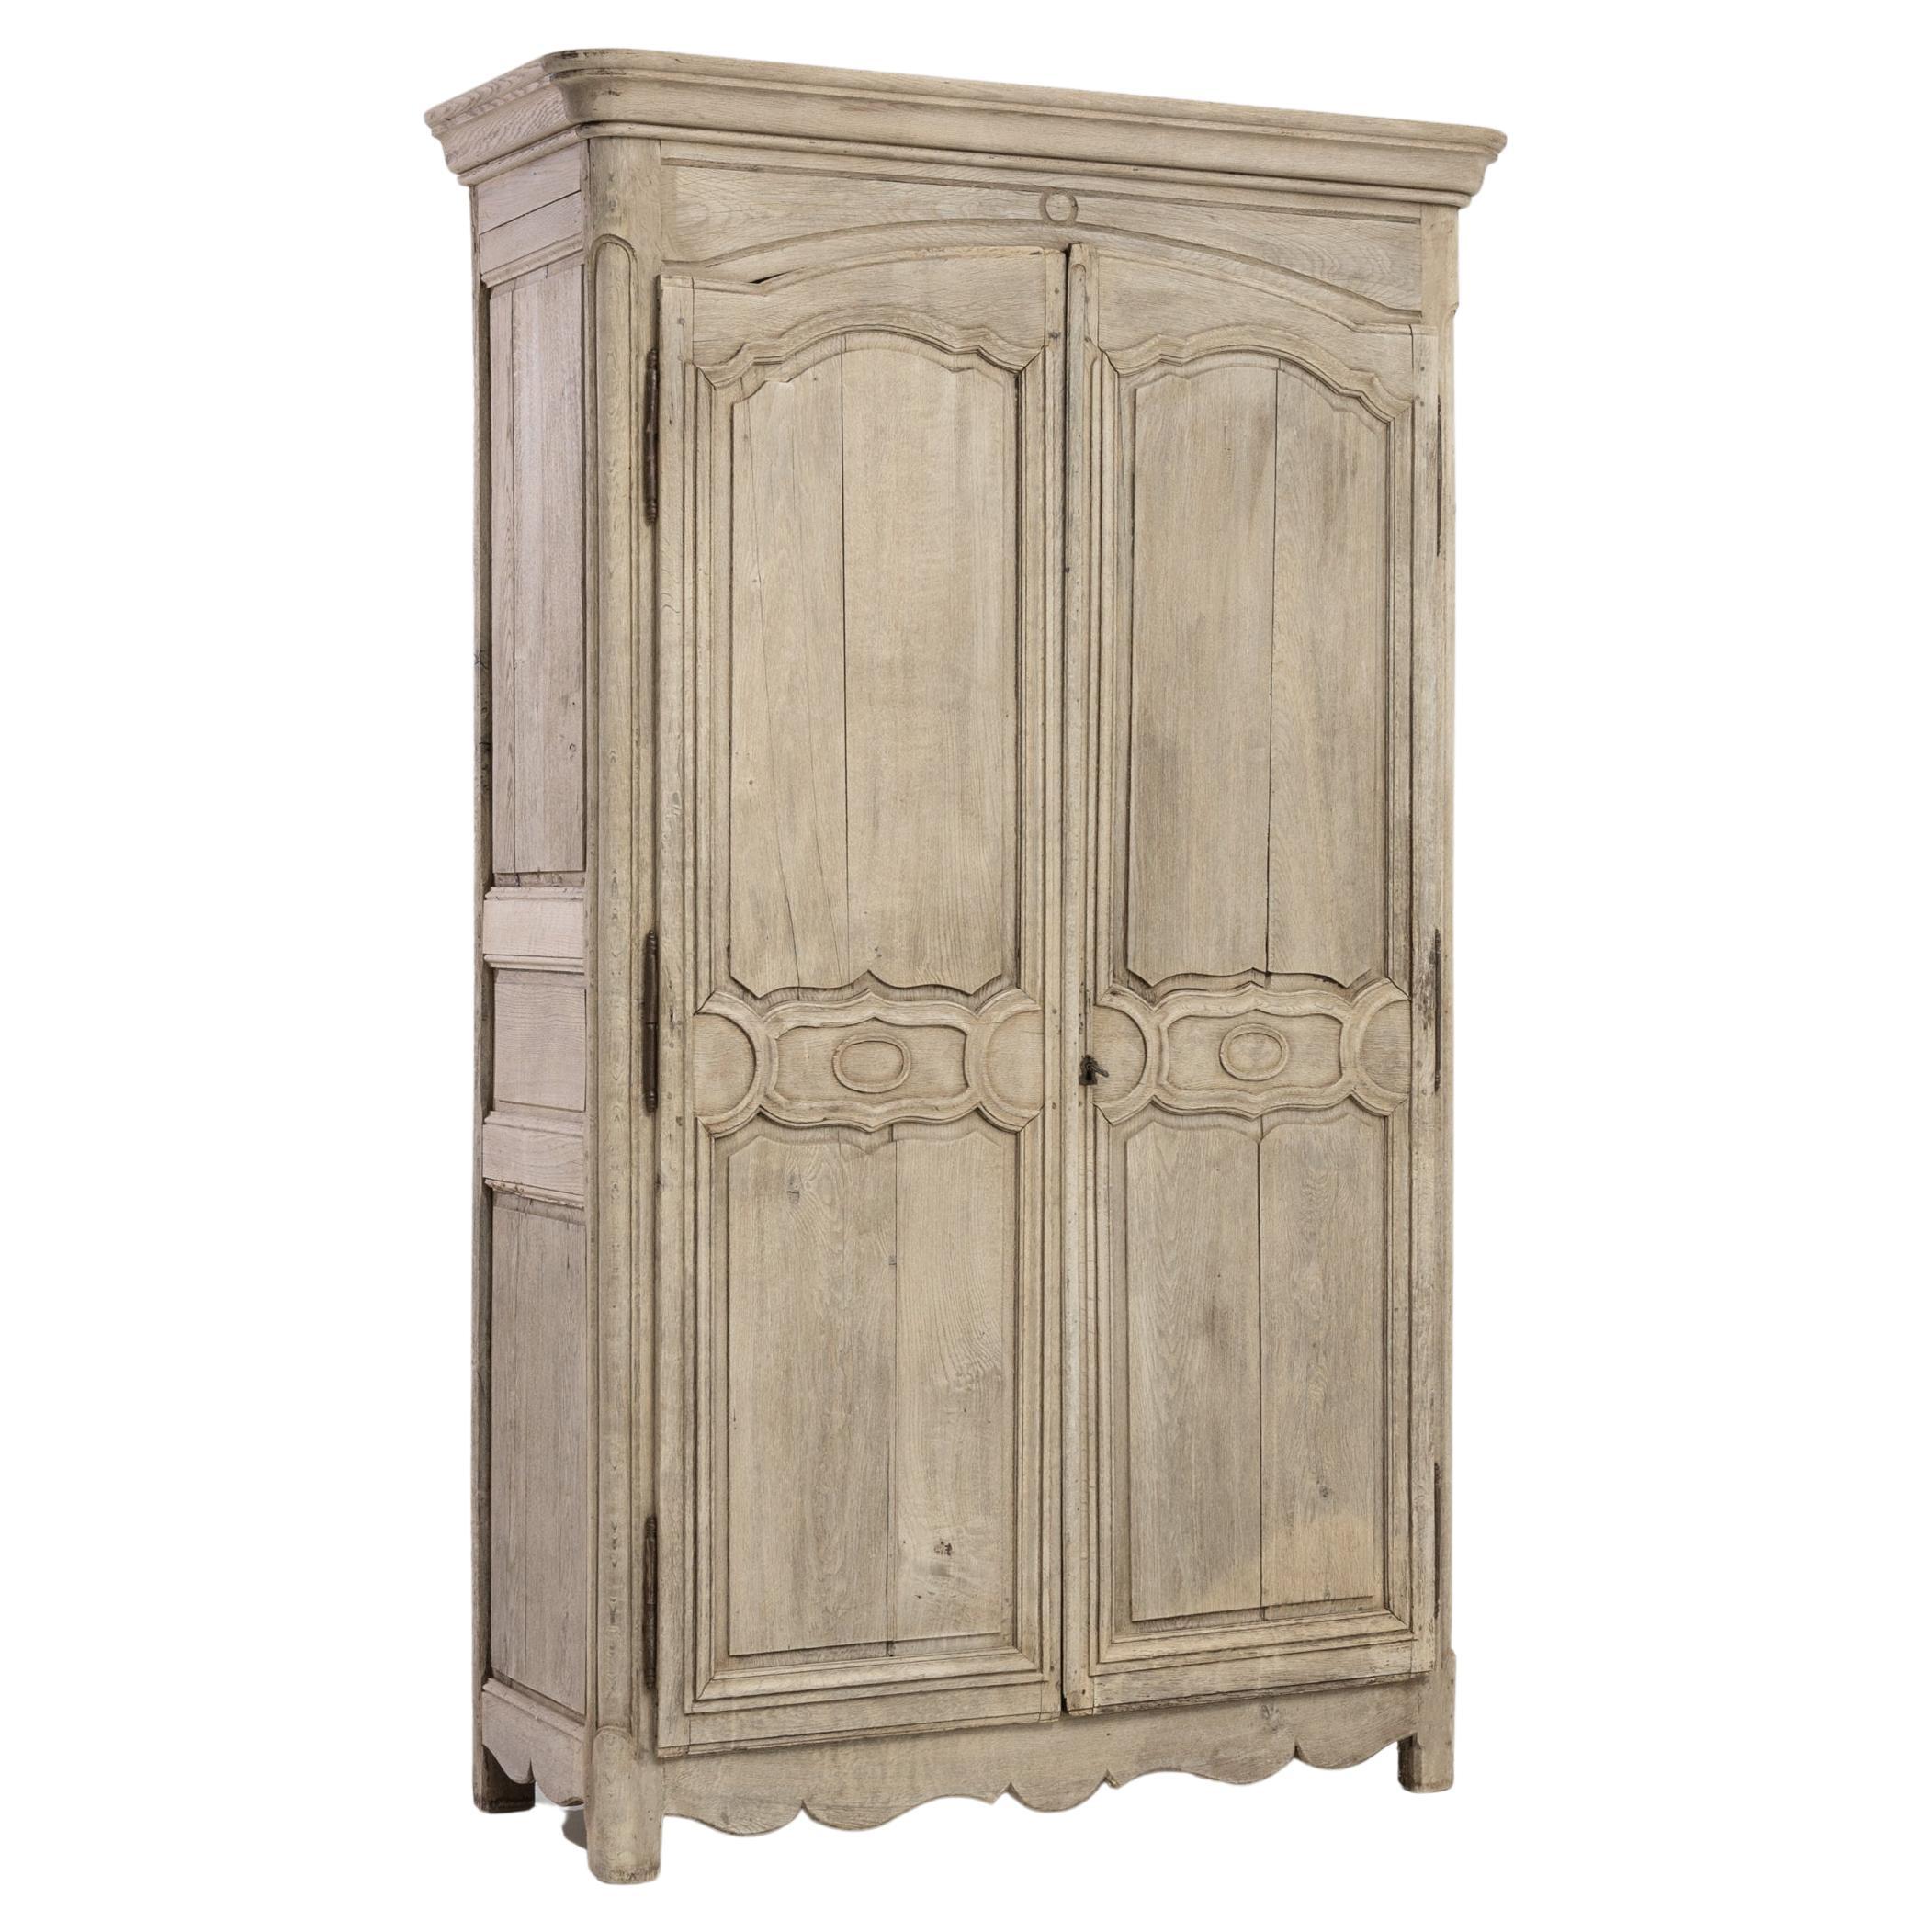 1830s French Bleached Oak Cabinet